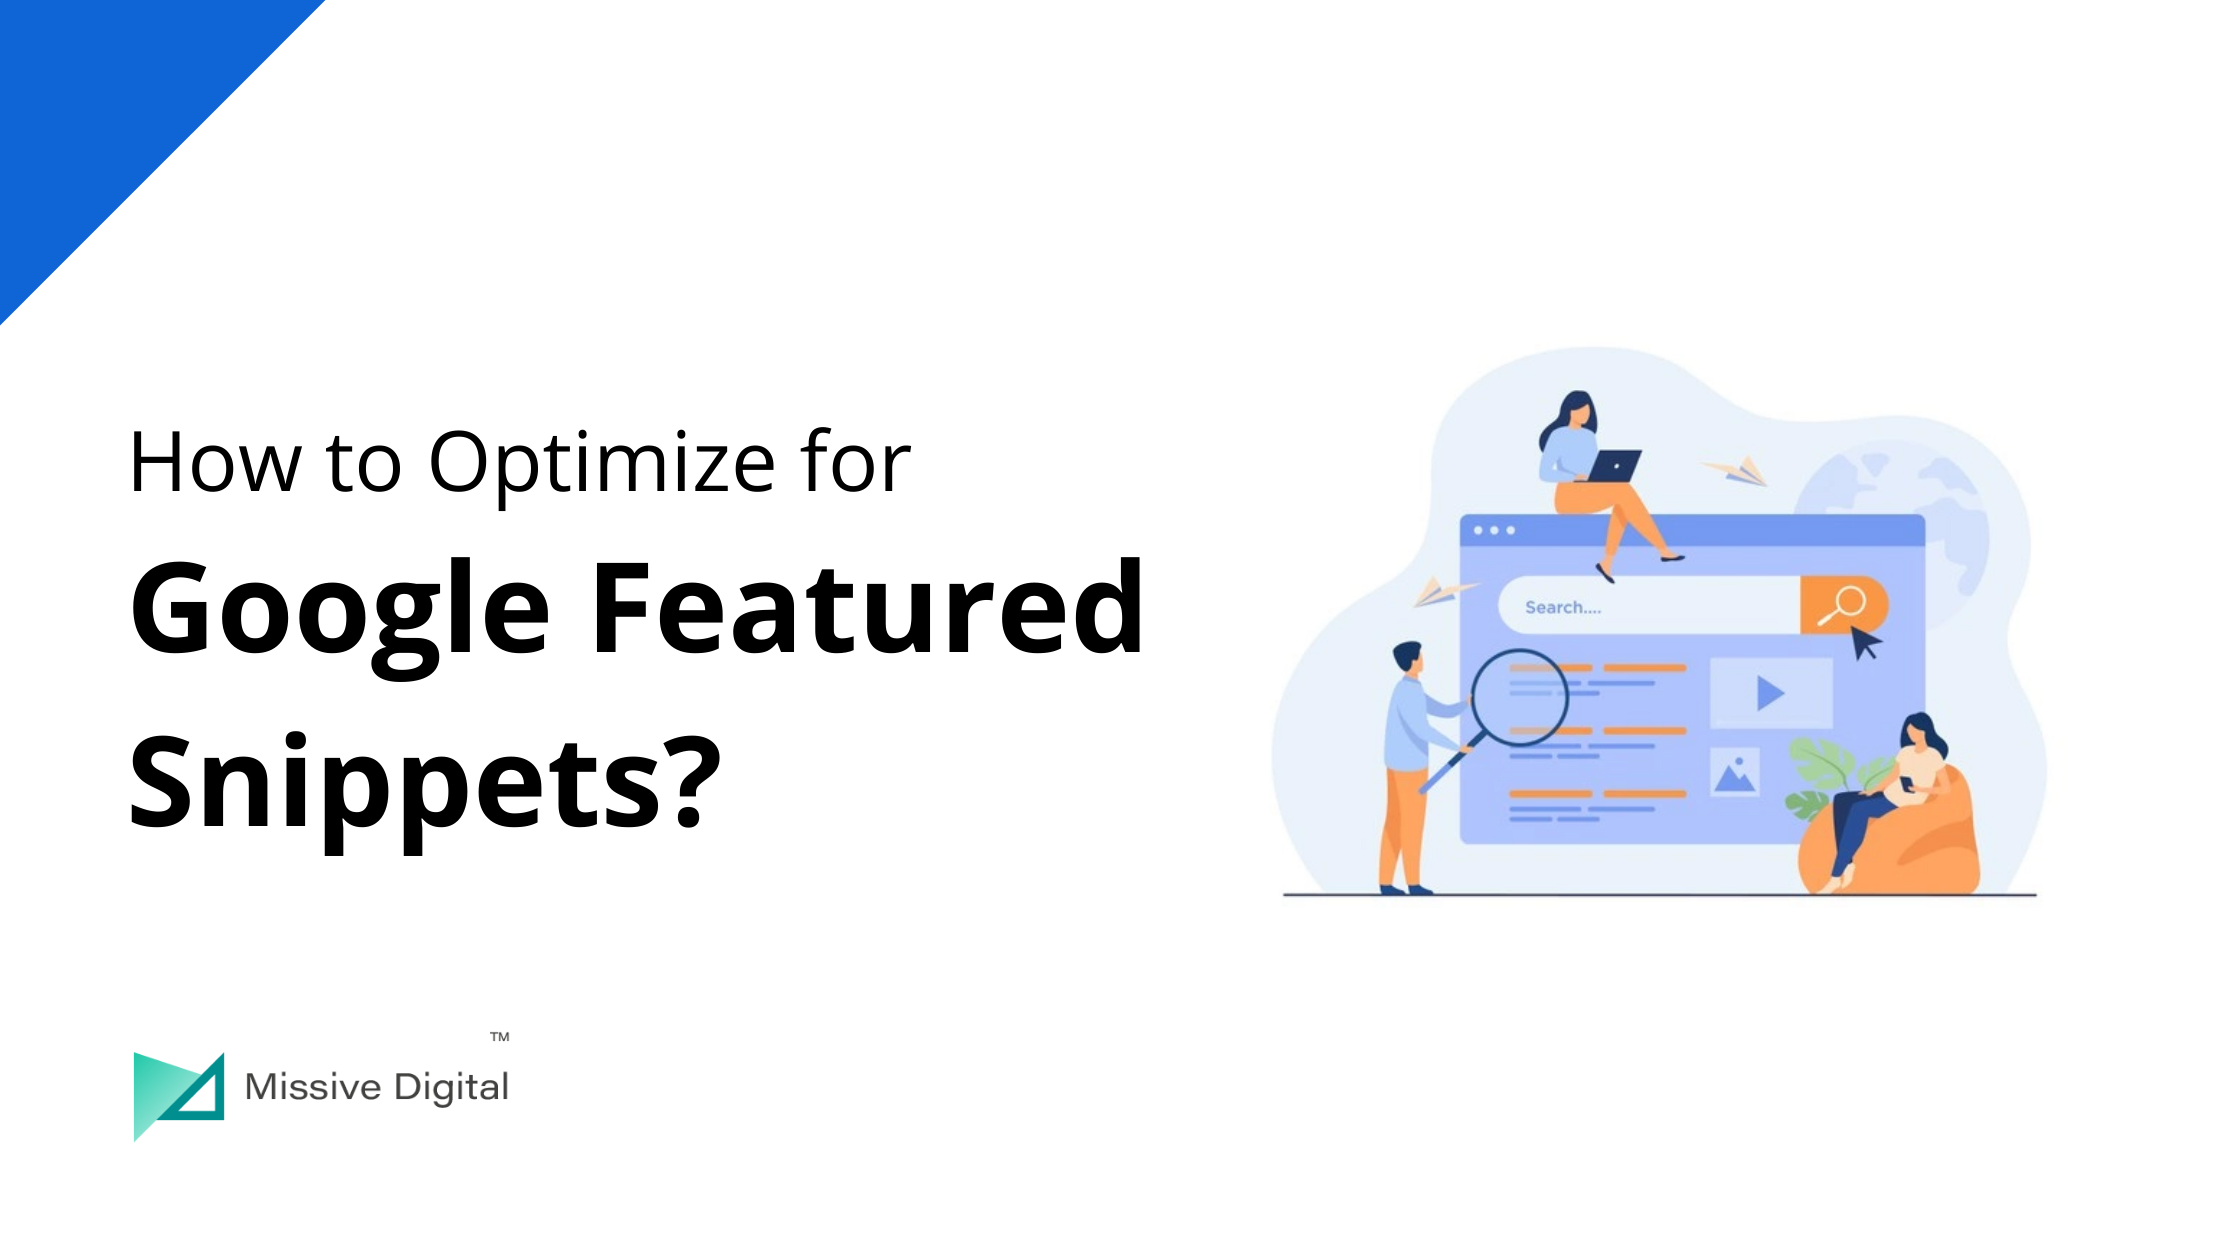 How to Optimize for Google Featured Snippets